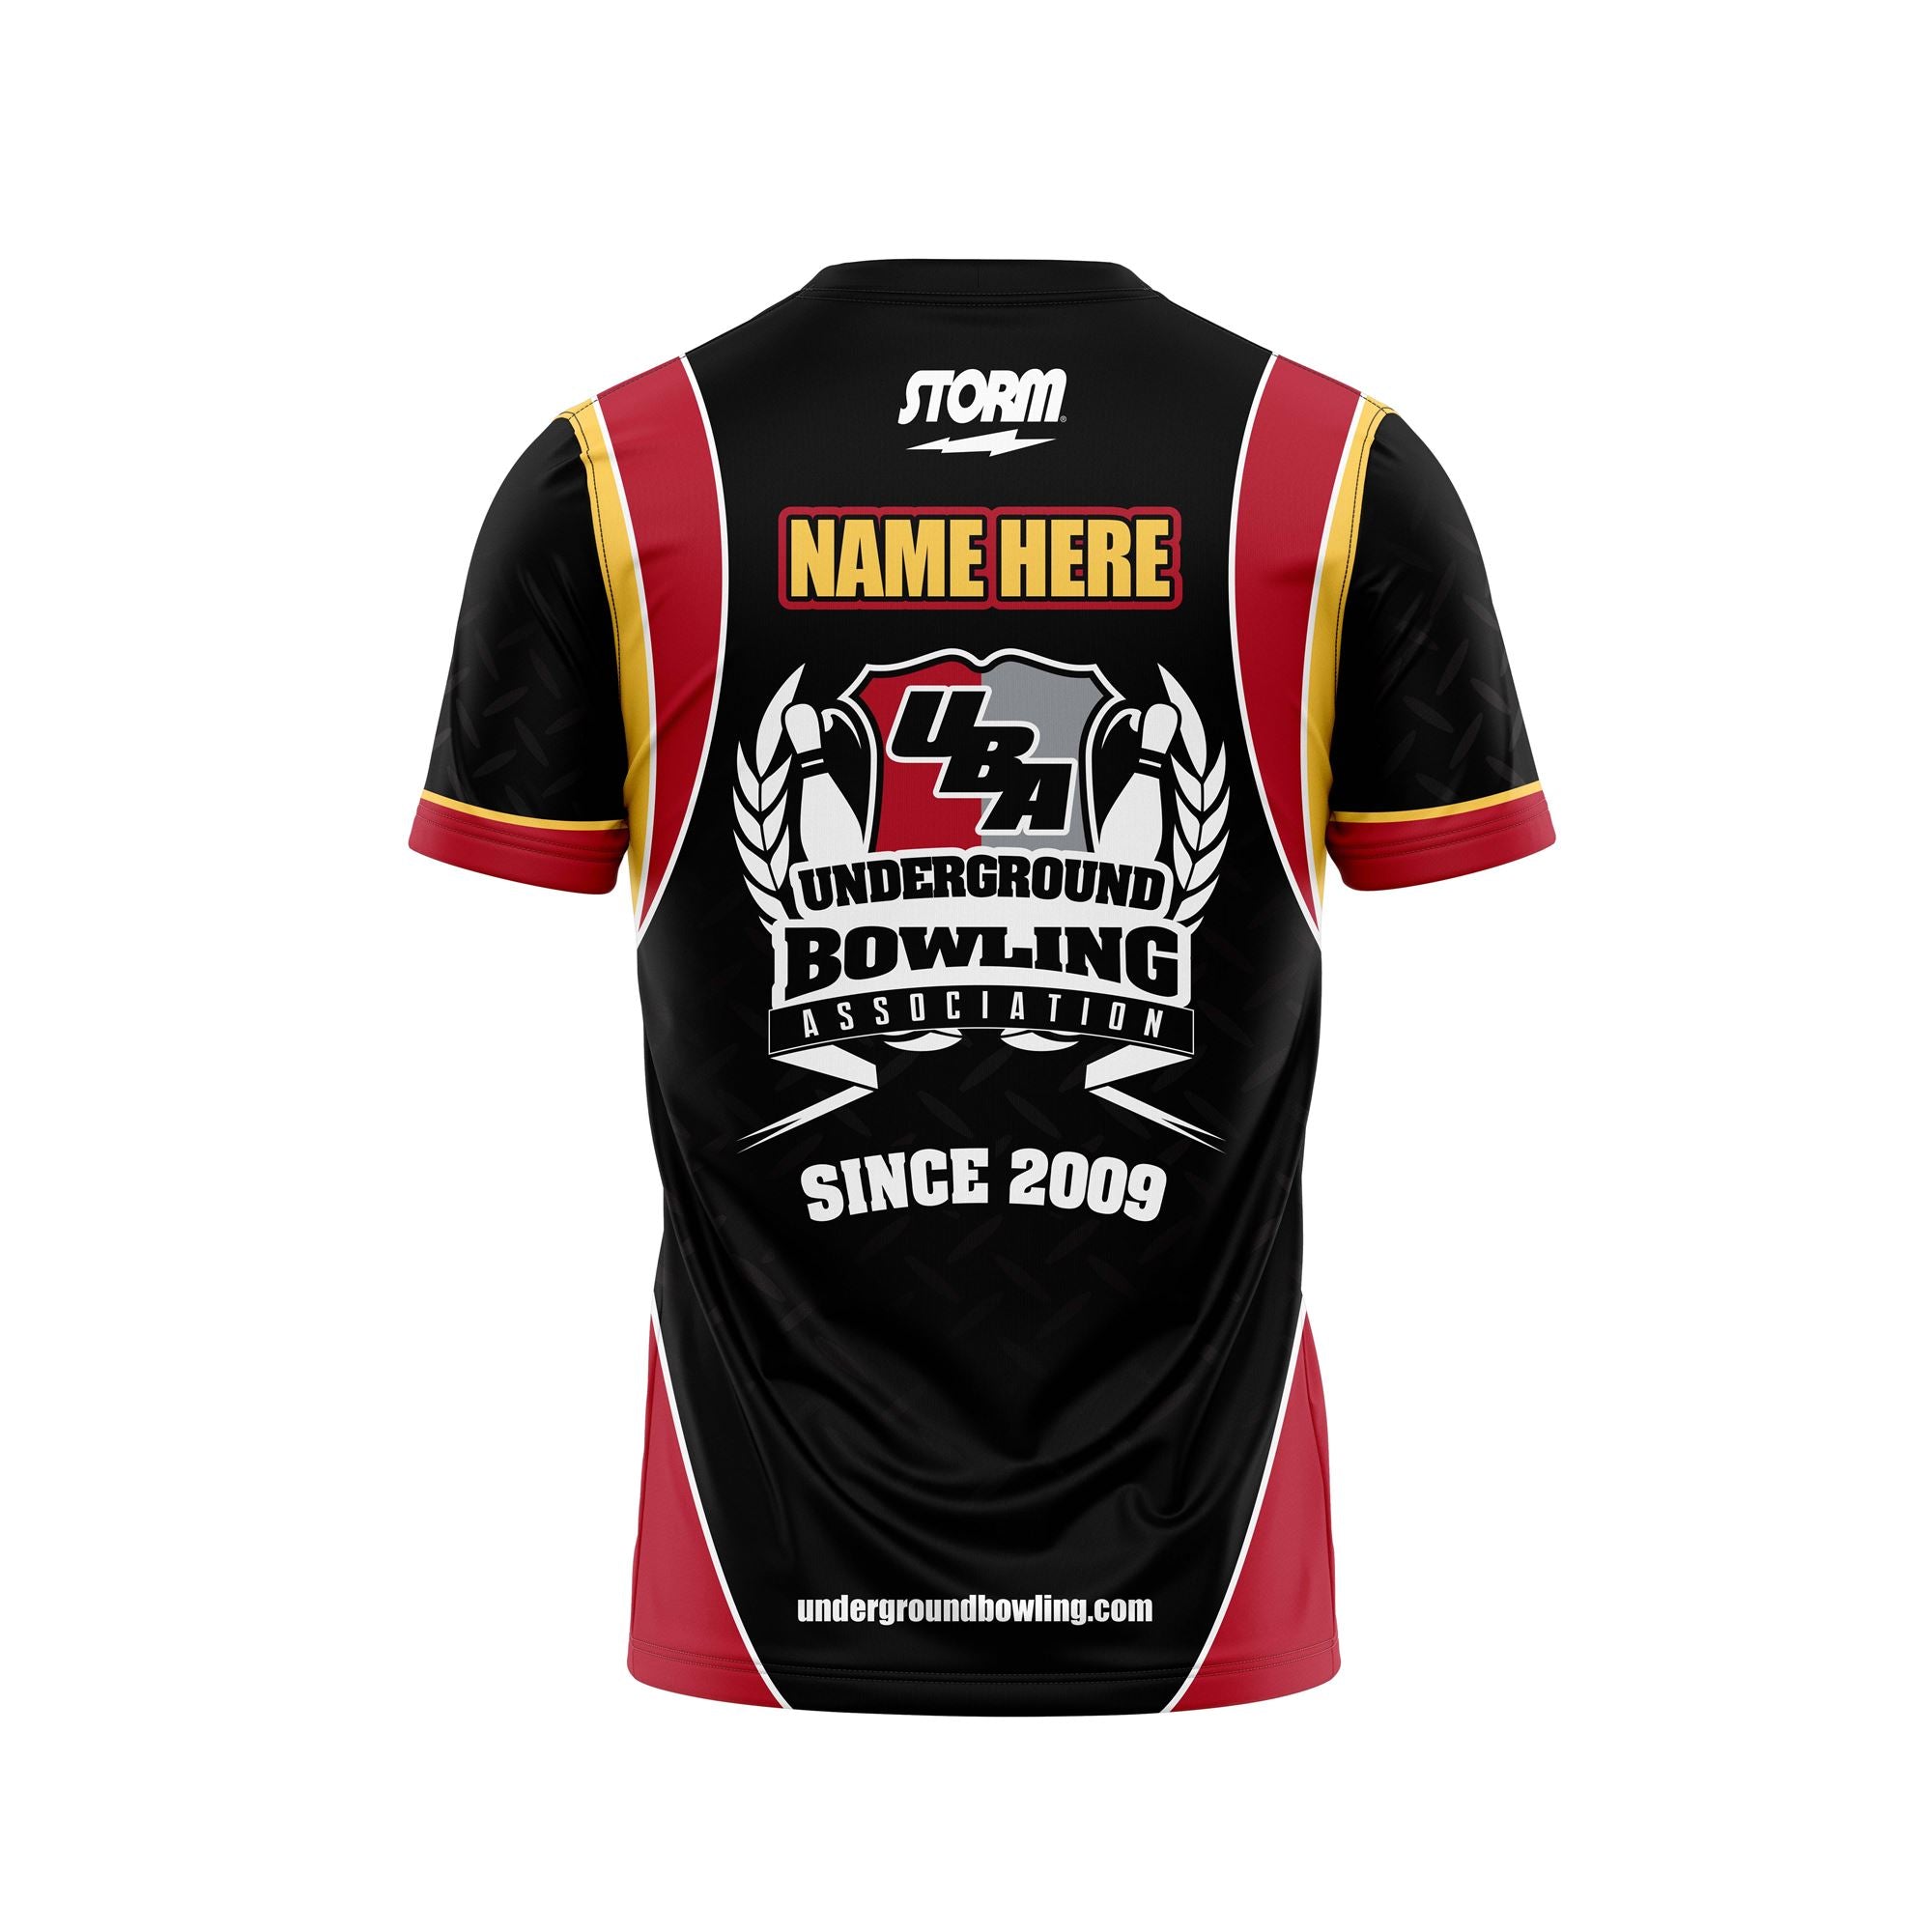 The Coalition Black Jersey